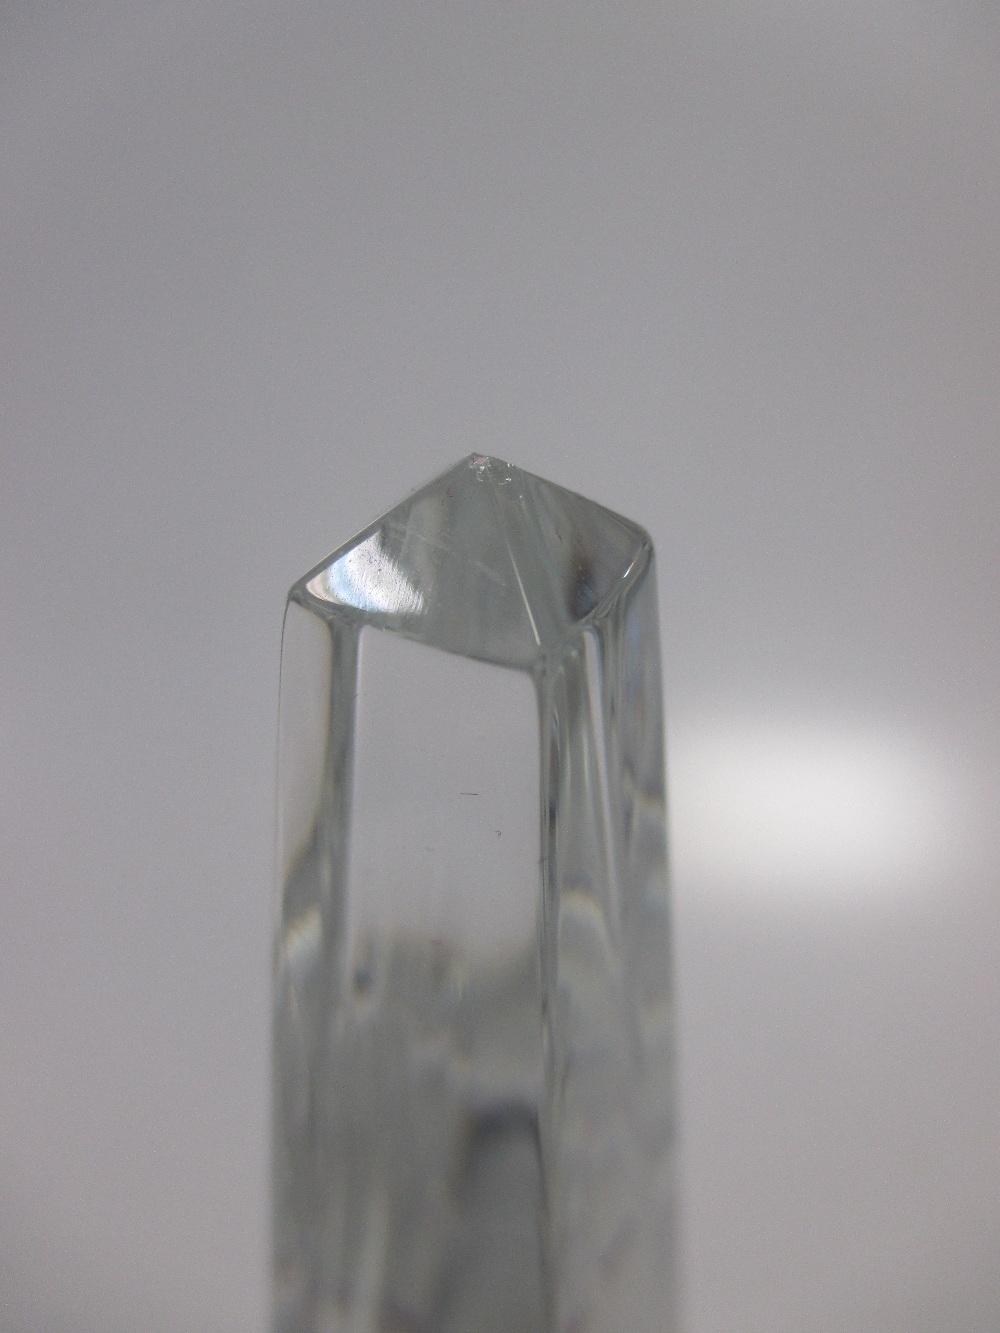 A glass obelisk by Baccarat in the original case 25cm high - Image 2 of 6